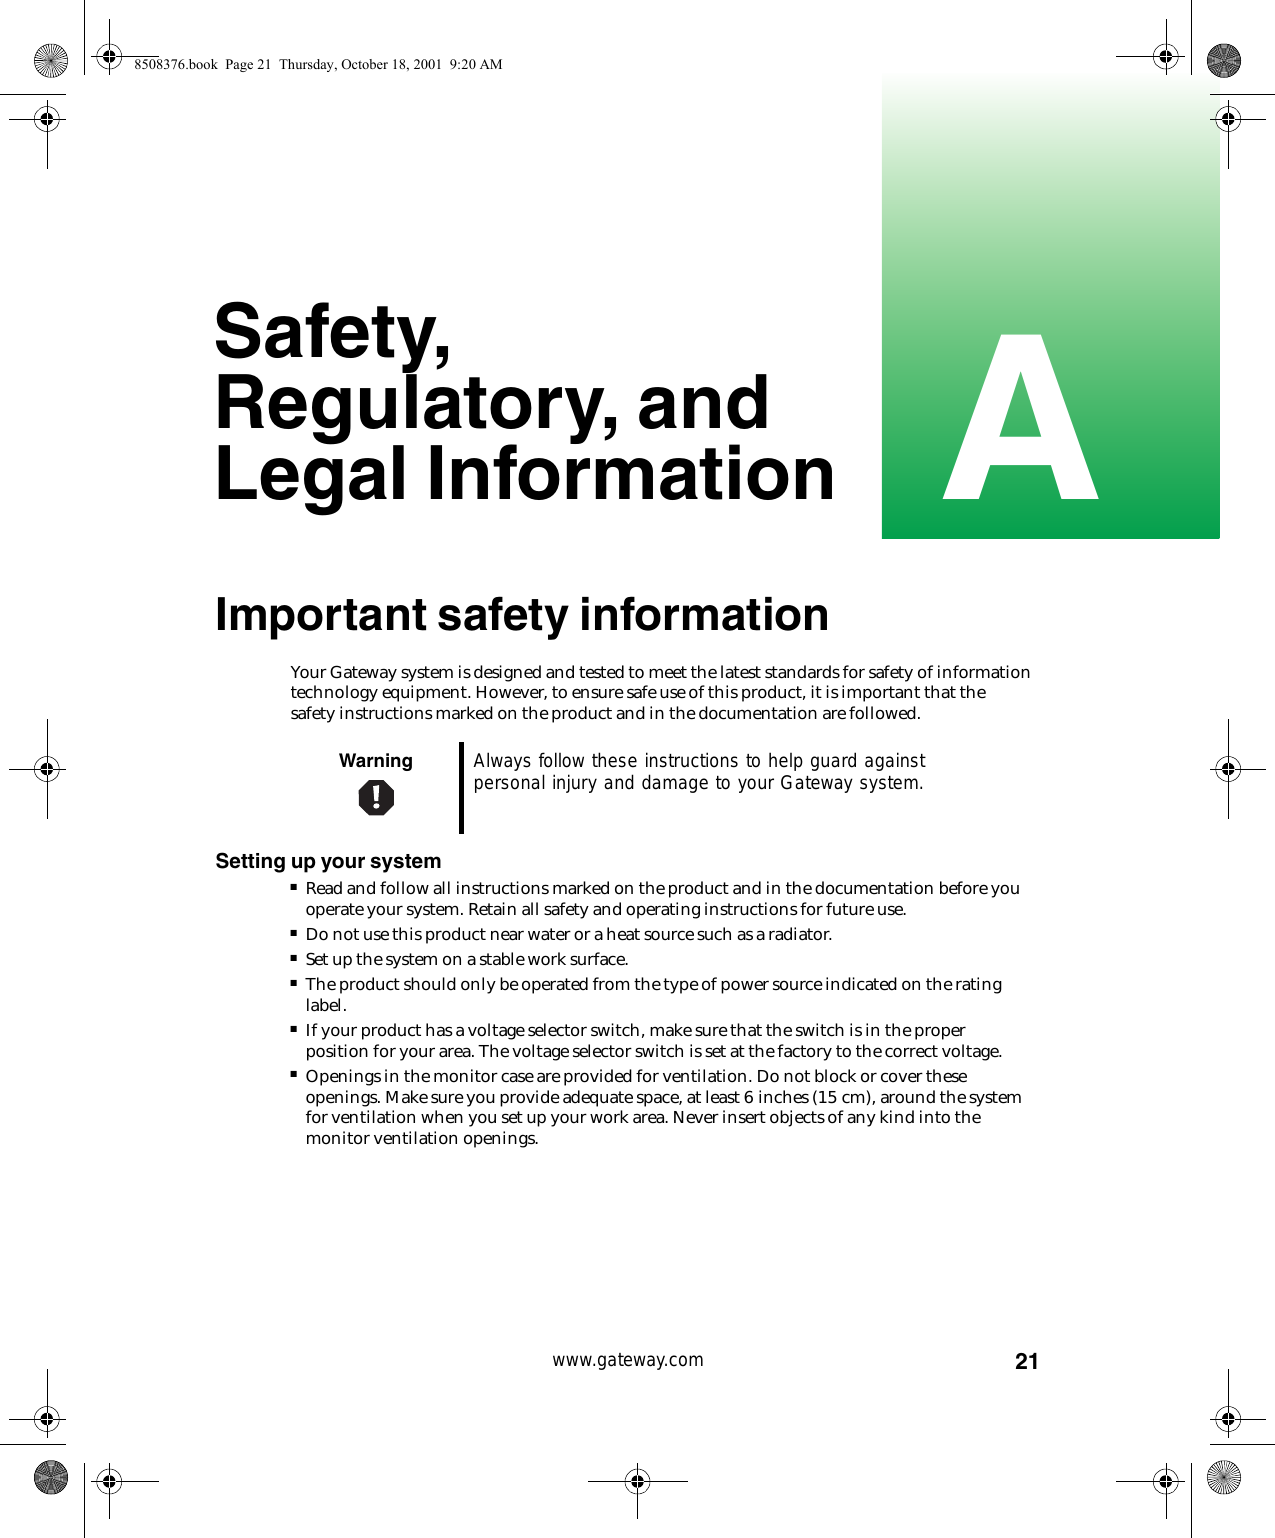 21Awww.gateway.comSafety, Regulatory, and Legal InformationImportant safety informationYour Gateway system is designed and tested to meet the latest standards for safety of information technology equipment. However, to ensure safe use of this product, it is important that the safety instructions marked on the product and in the documentation are followed.Setting up your system■Read and follow all instructions marked on the product and in the documentation before you operate your system. Retain all safety and operating instructions for future use.■Do not use this product near water or a heat source such as a radiator.■Set up the system on a stable work surface.■The product should only be operated from the type of power source indicated on the rating label.■If your product has a voltage selector switch, make sure that the switch is in the proper position for your area. The voltage selector switch is set at the factory to the correct voltage.■Openings in the monitor case are provided for ventilation. Do not block or cover these openings. Make sure you provide adequate space, at least 6 inches (15 cm), around the system for ventilation when you set up your work area. Never insert objects of any kind into the monitor ventilation openings.Warning Always follow these instructions to help guard against personal injury and damage to your Gateway system.8508376.book  Page 21  Thursday, October 18, 2001  9:20 AM